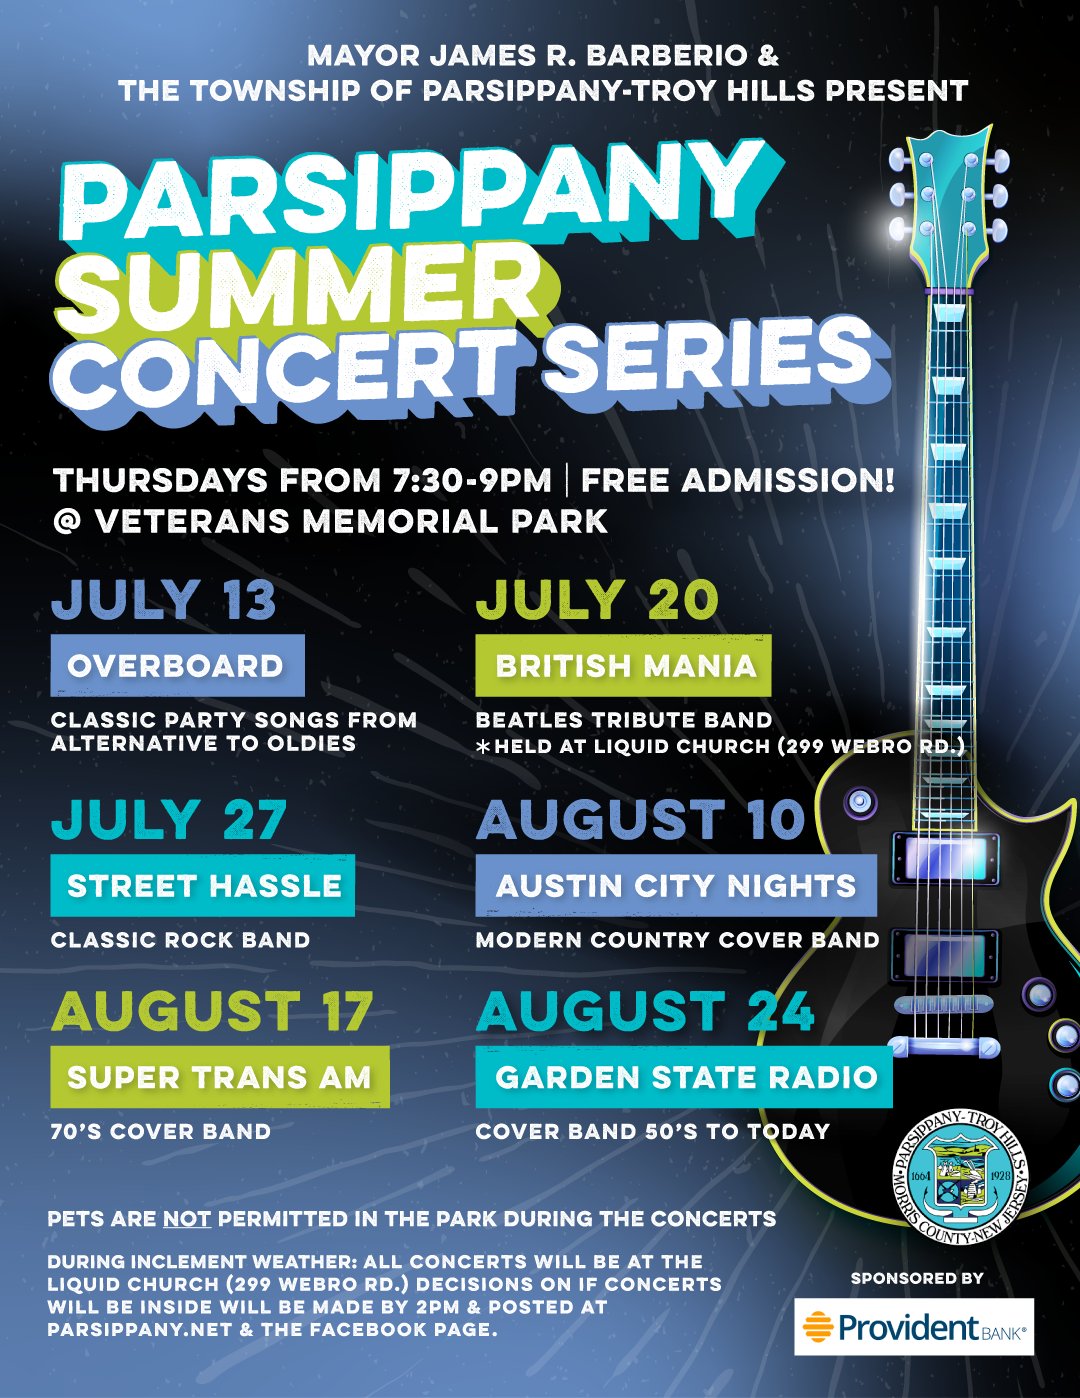 ParsippanyTroy Hills on Twitter "Save the dates for our Parsippany